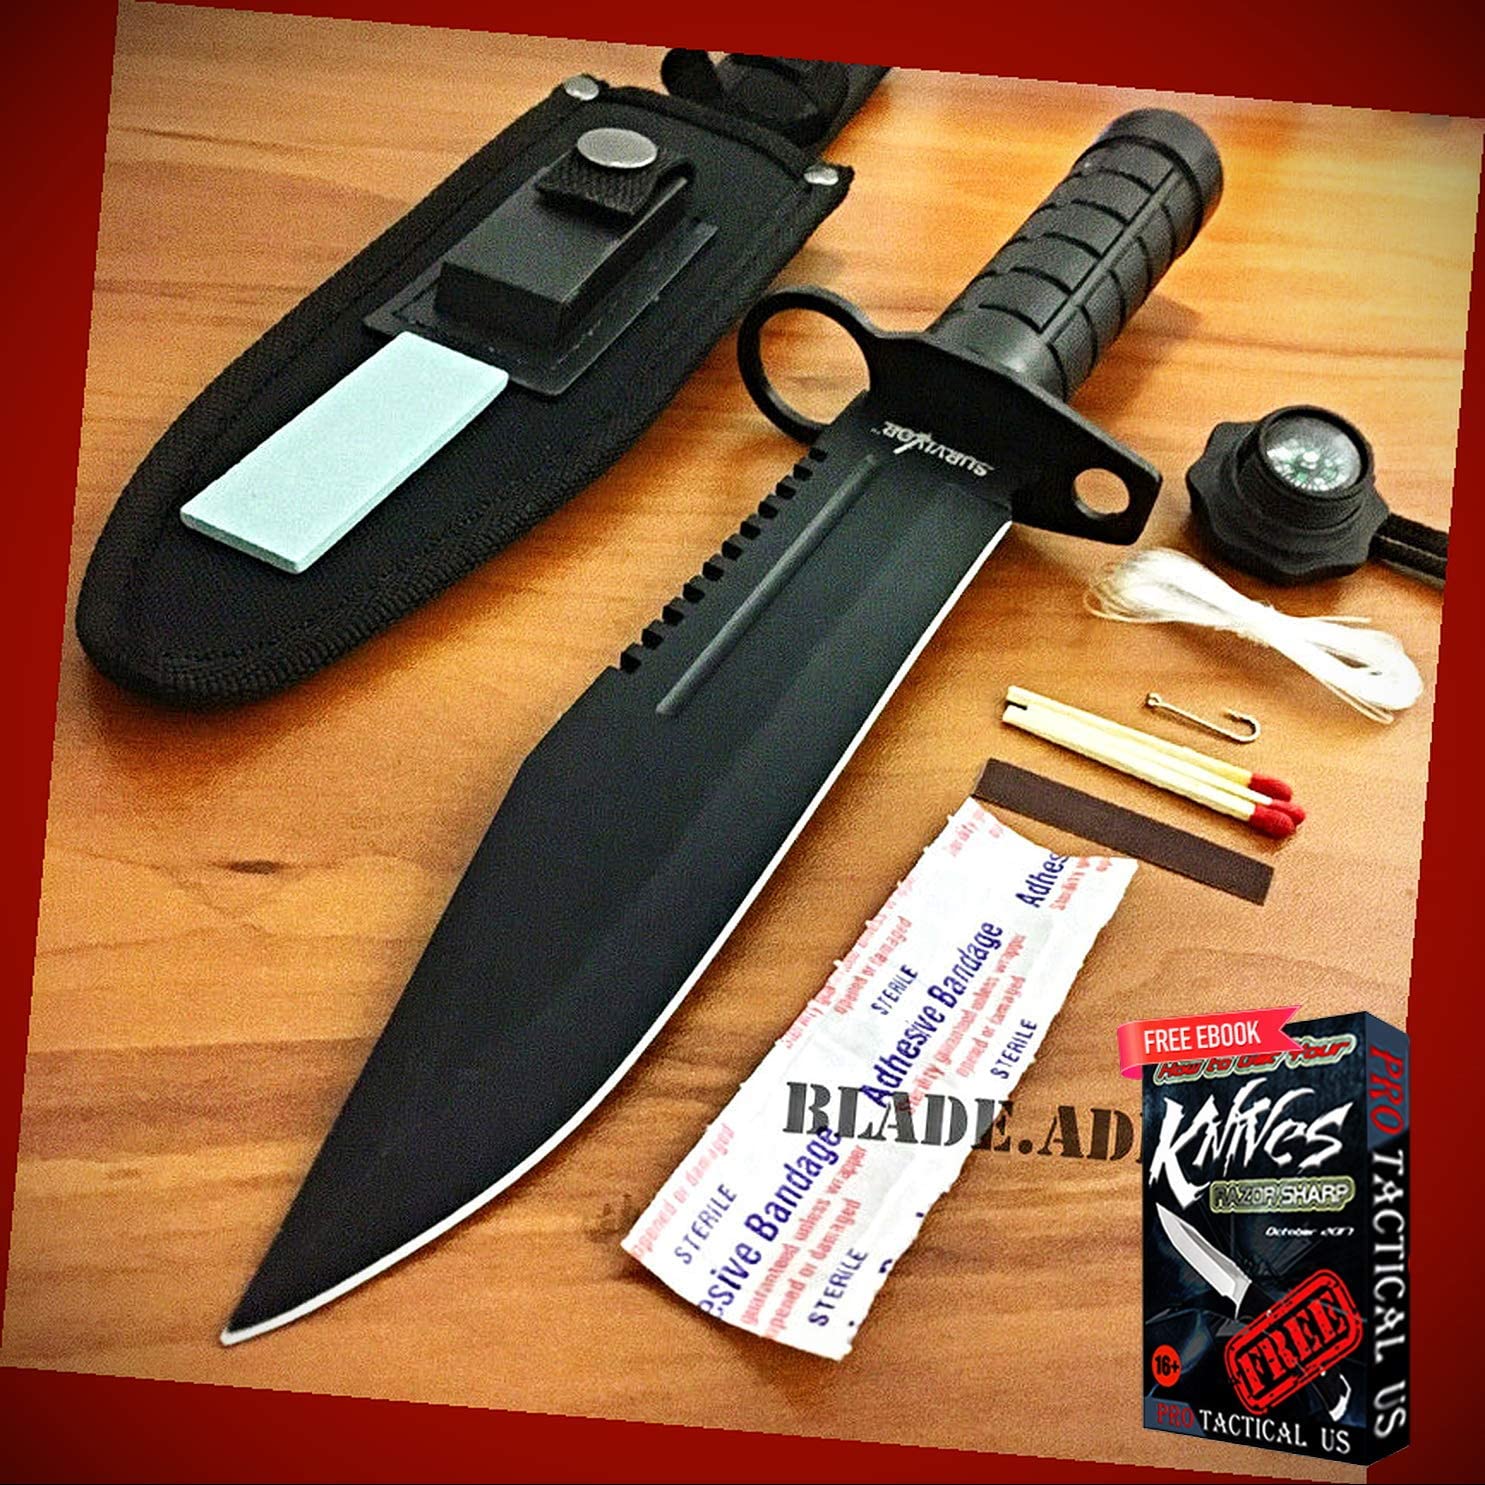 New 12" inch Tactical Hunting Rambo Combat Fixed Blade ProTactical Knife Machete Survival Kit BA-0737kn by PrTac-US